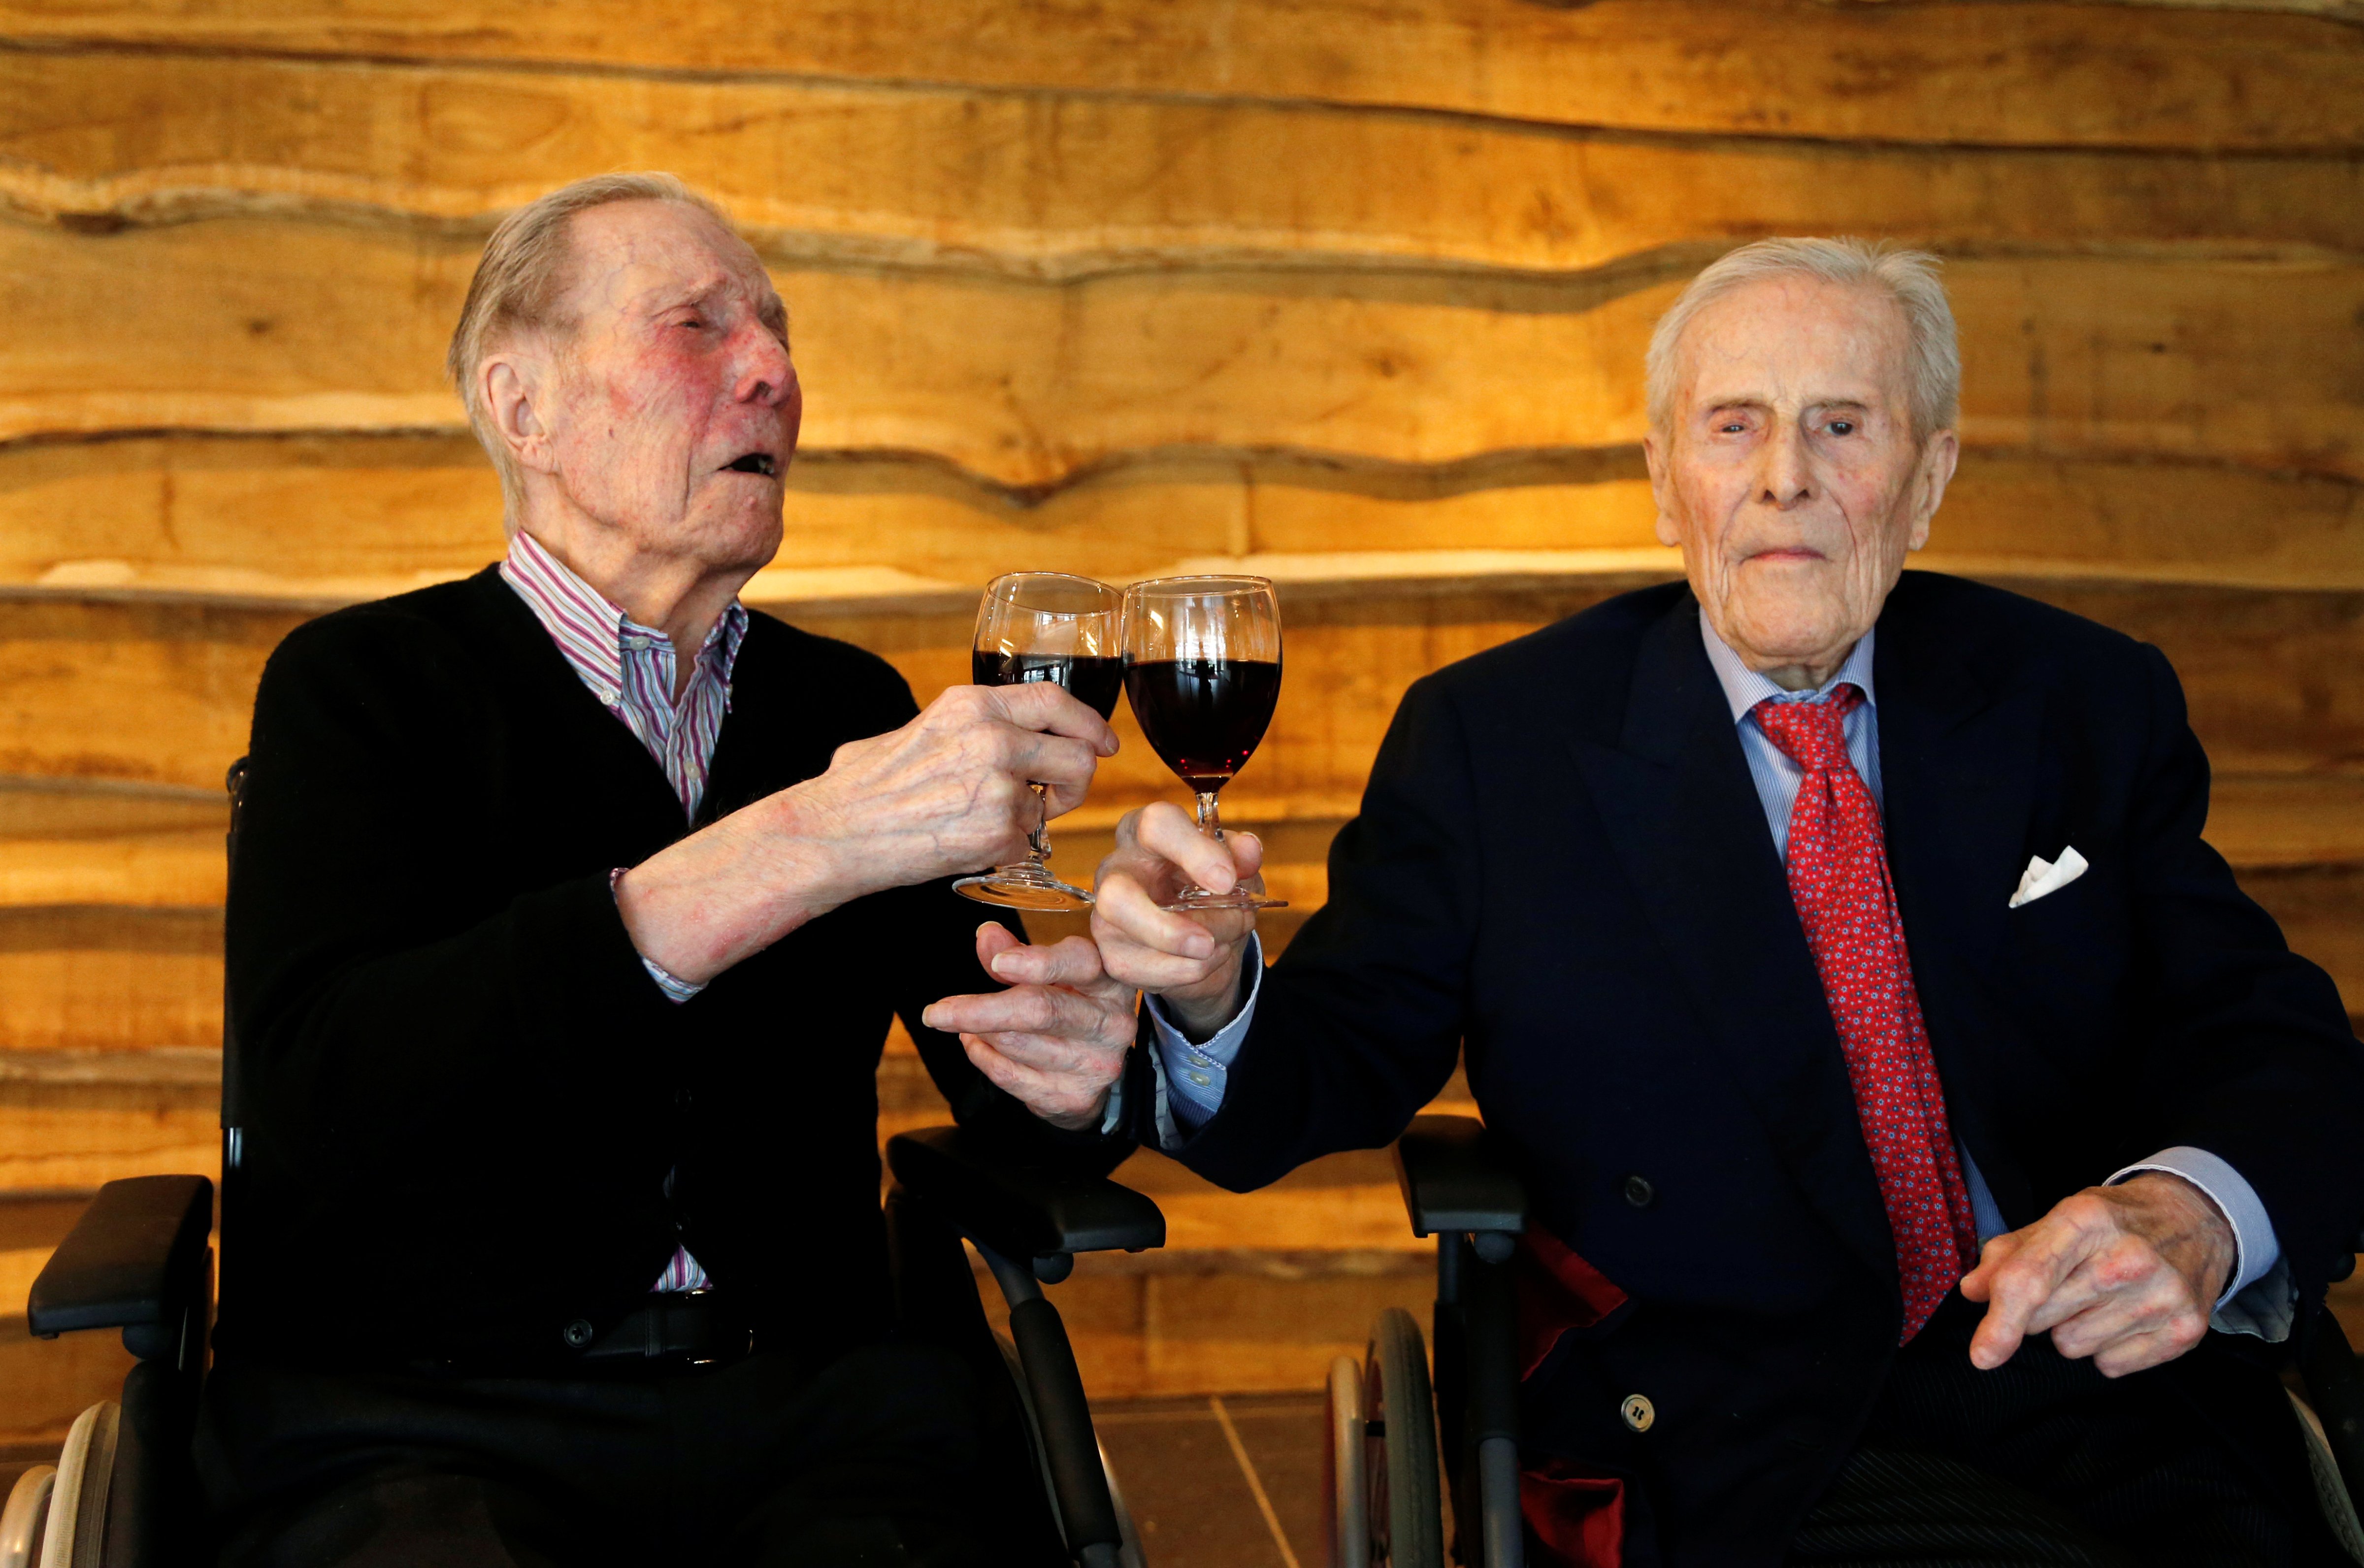 The world's oldest living twin brothers, Paulus and Pieter Langerock from Belgium, 102, toast with a glass of red wine at the Ter Venne retirement home in Sint-Martens-Latem